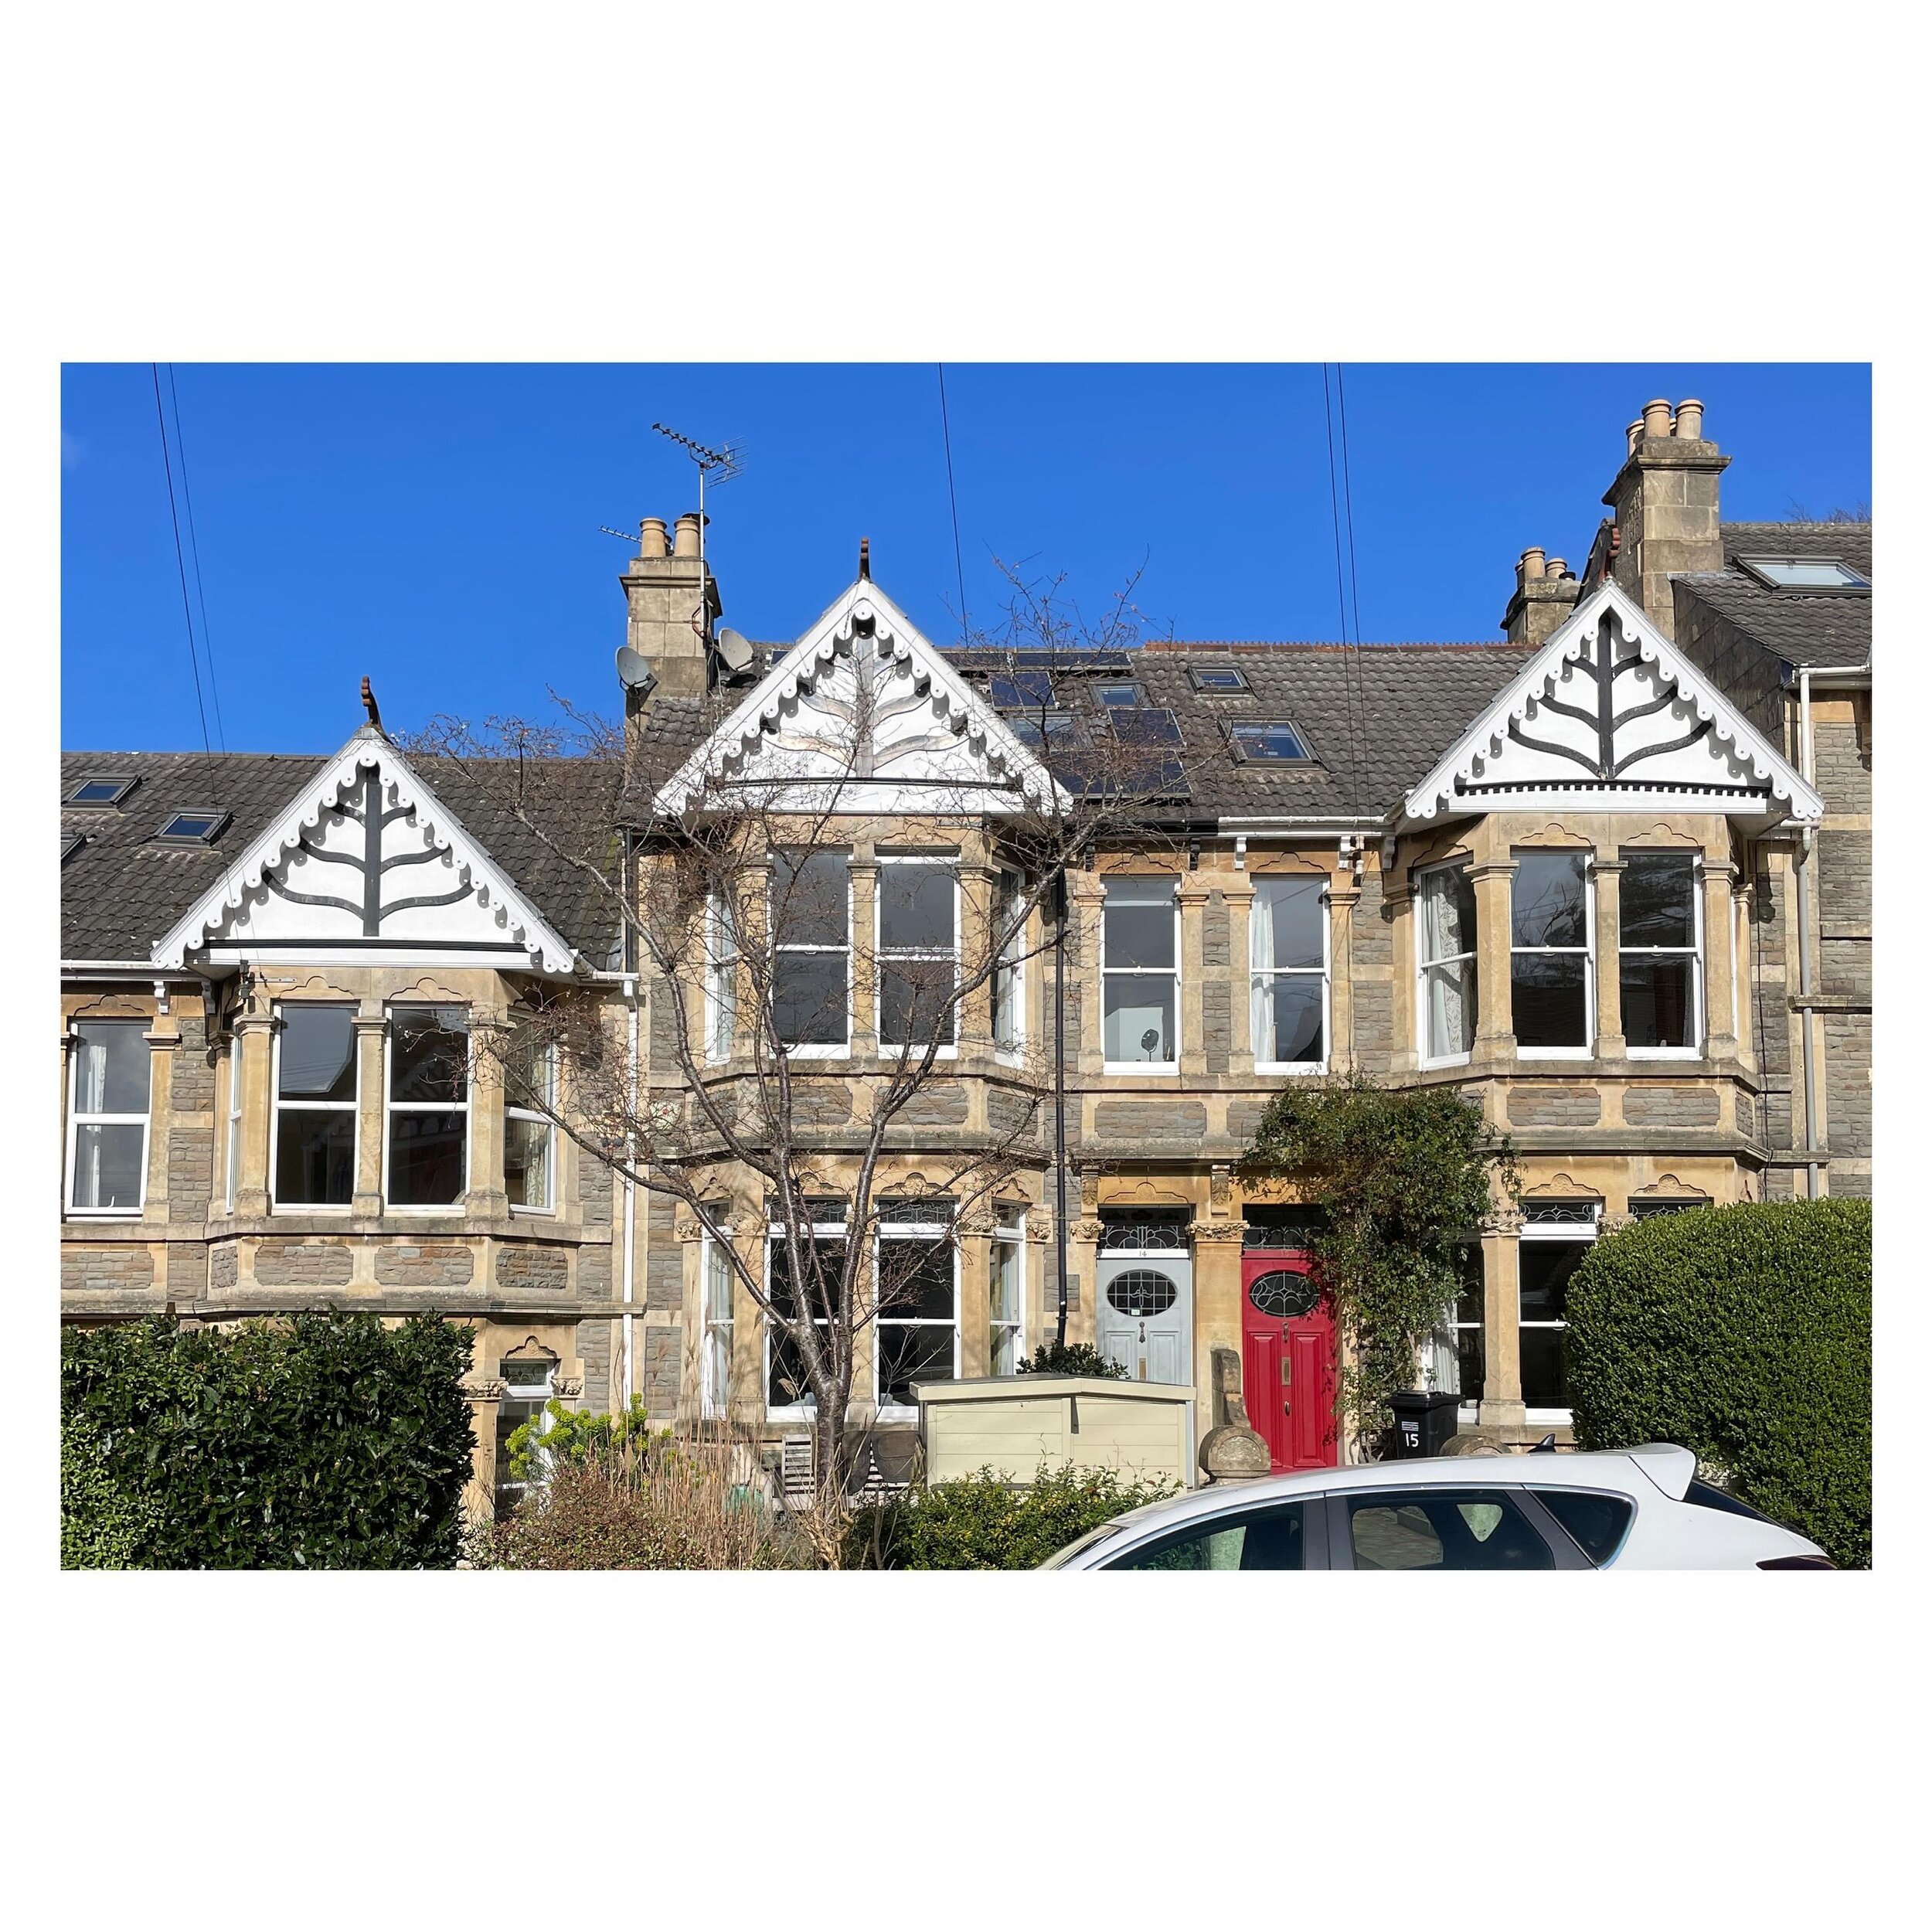 | Bath Deep Retrofit

We are looking forward to getting started with this major house refurbishment in Bath following planning approval from Bathnes.

Working with @greengaugebec and @fold_eng the design combines thermal upgrades to the existing fabr